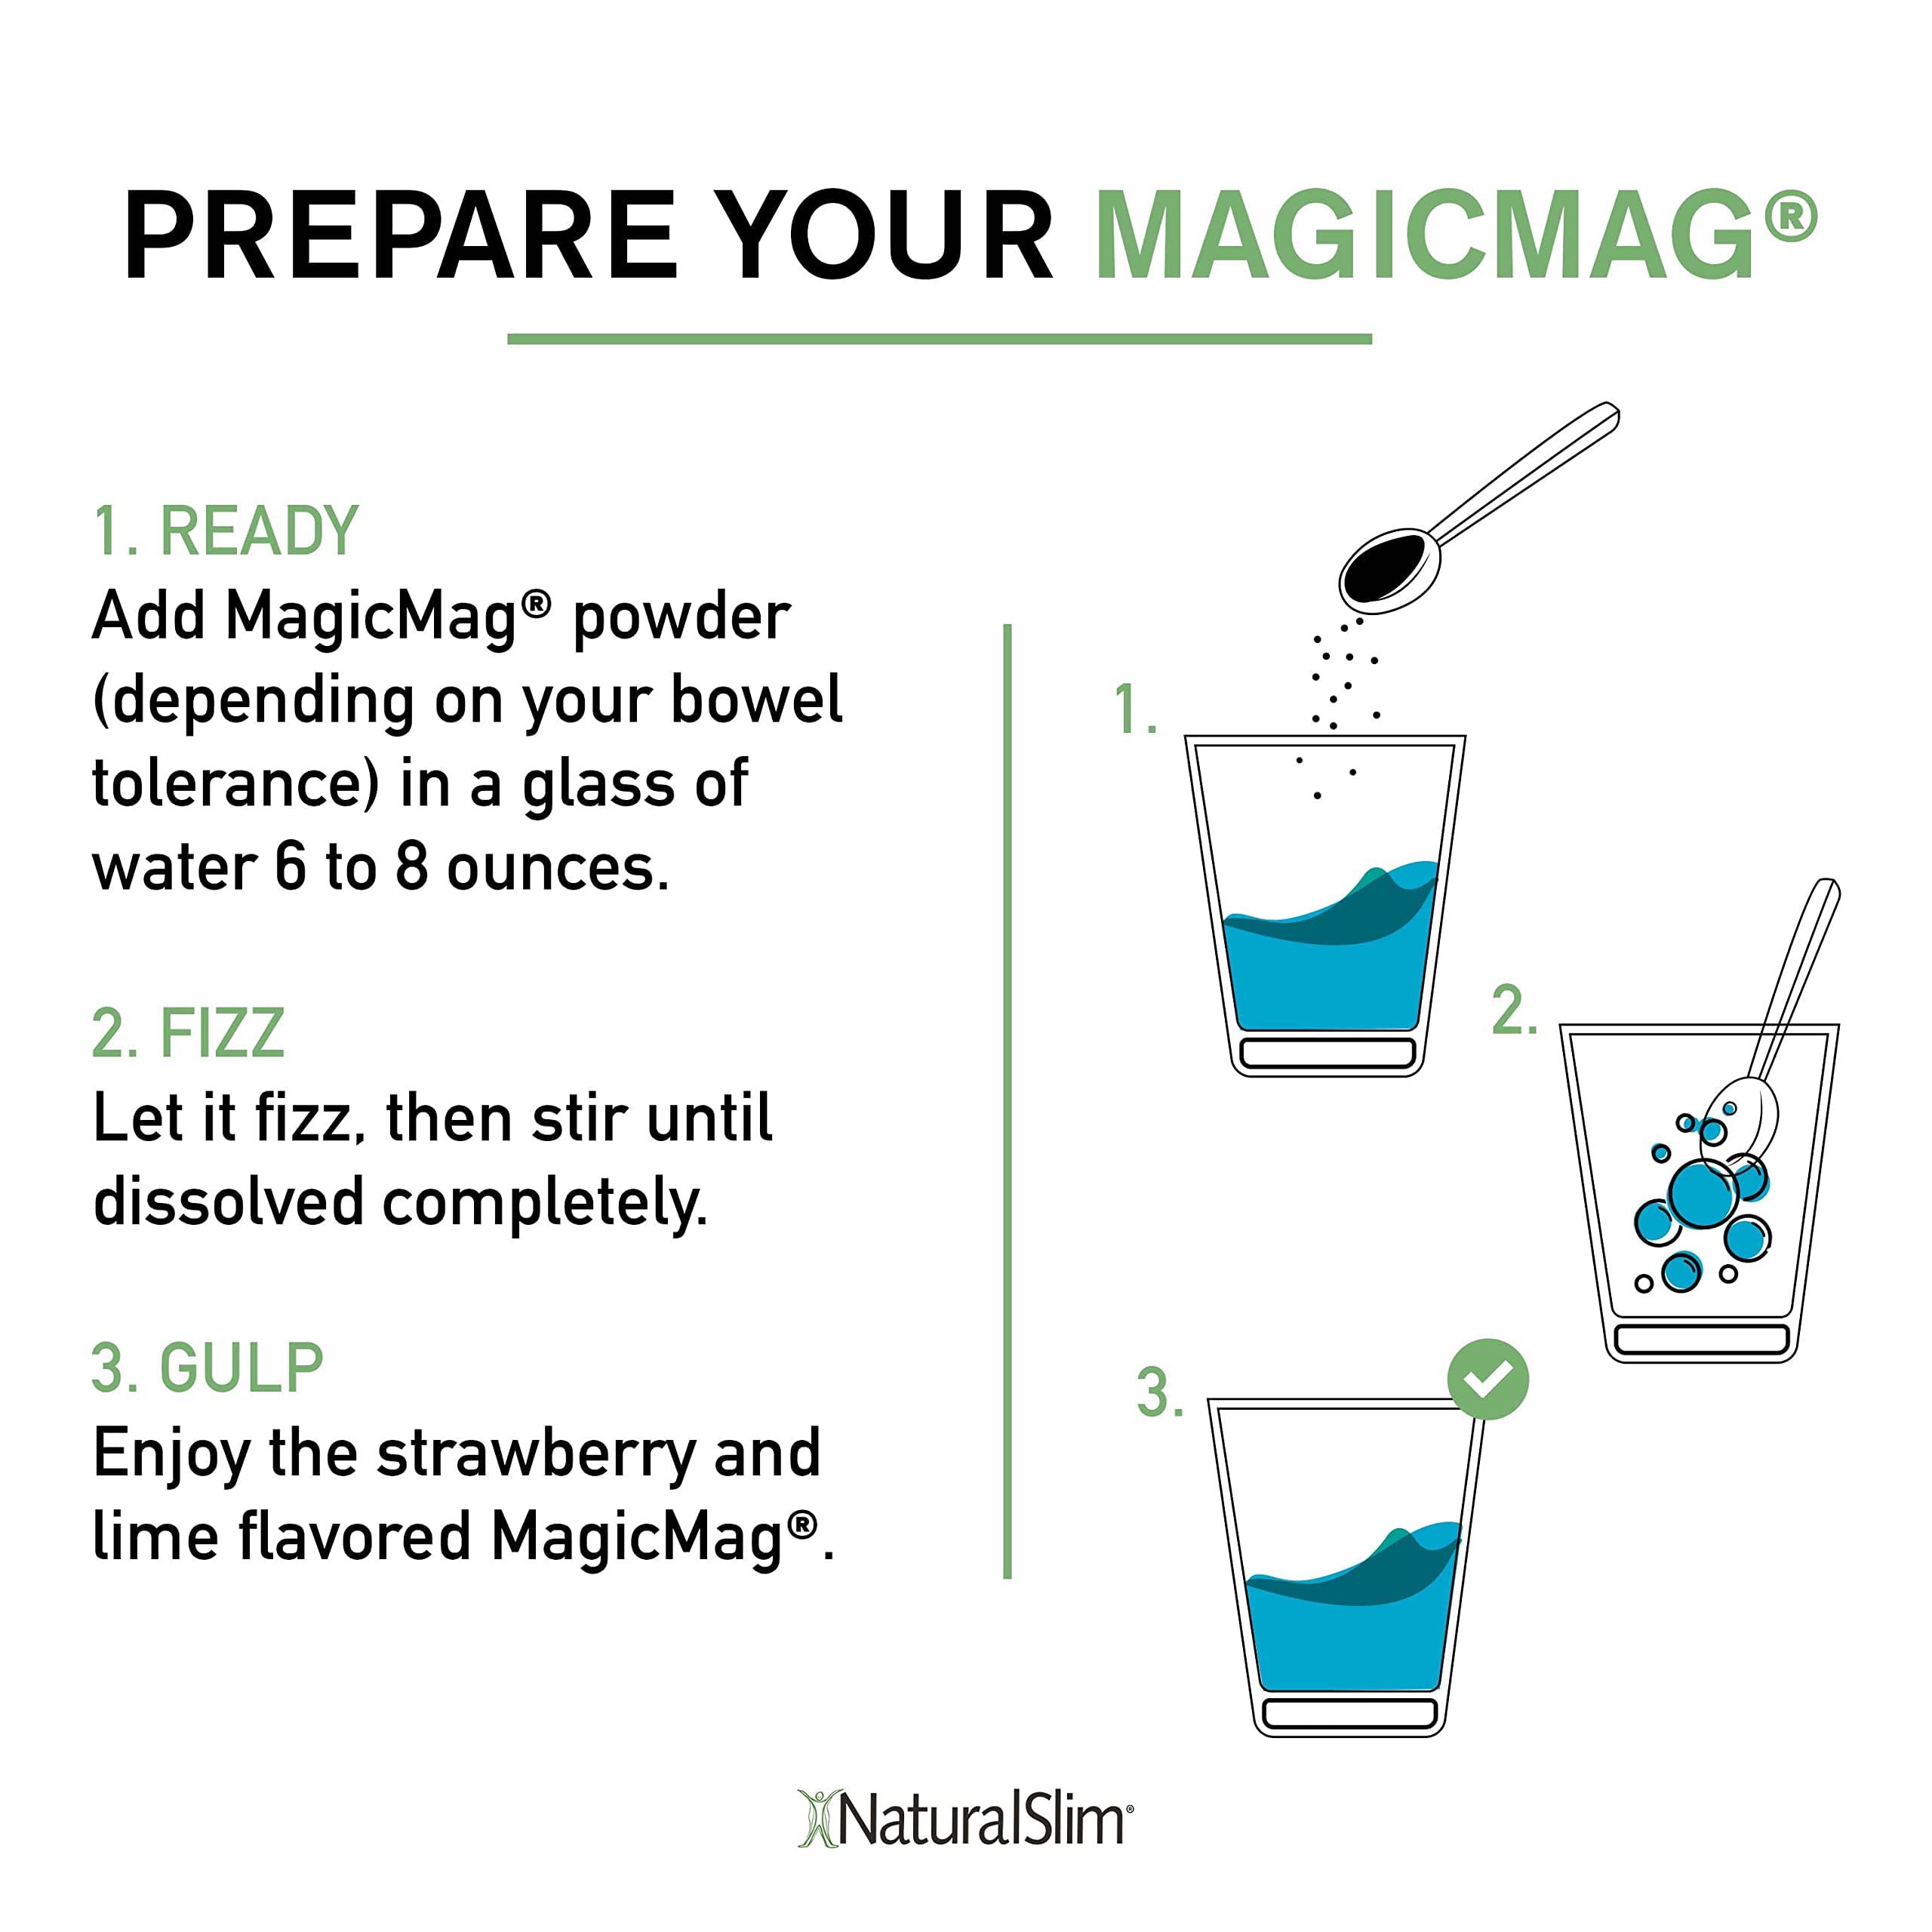 NaturalSlim Dynamic Duo - MagicMag Magnesium Powder Stress & Sleep Support Drink & Kadsorb Potassium Caps Electrolyte Balance Normal pH Support - Natural Aid for a Slow Metabolism